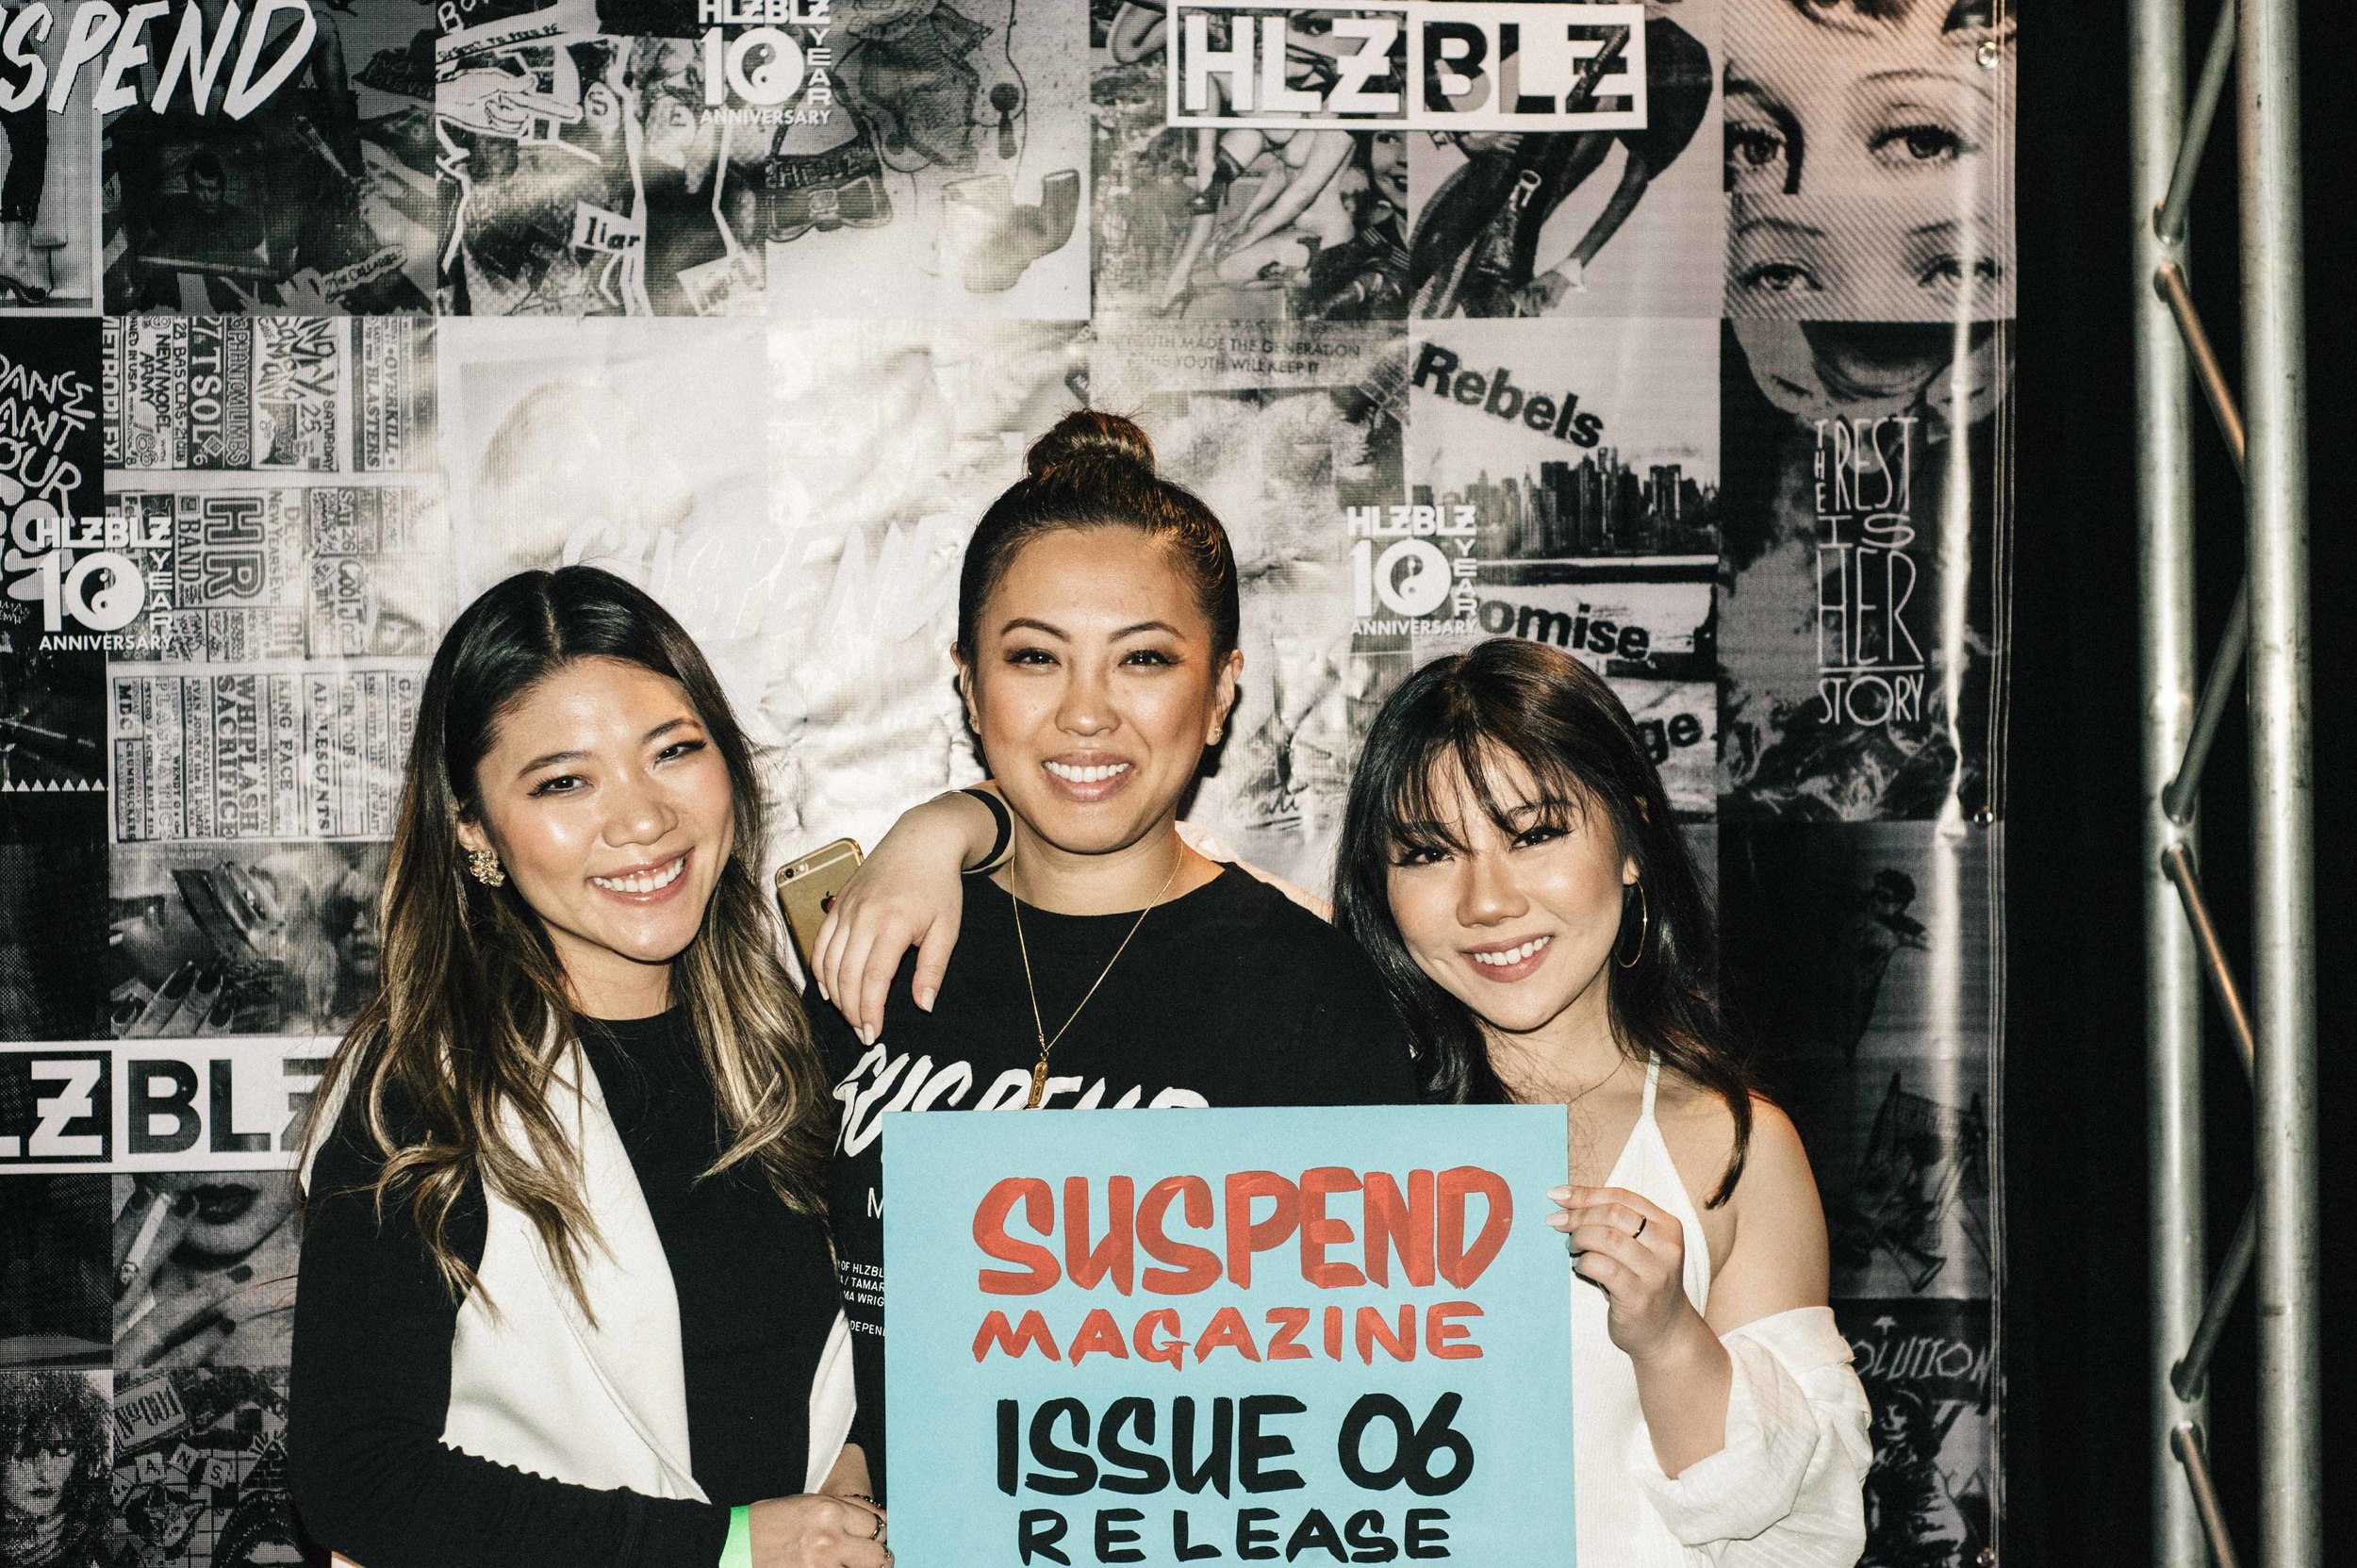  EIC Diane Abapo with SUSPEND photographer Christy J. Kim at the ISSUE 06 Launch x HLZBLZ 10Year Anniversary (Feb 11) at Globe Theater. / Photo: © Jordan Abapo for SUSPEND Magazine 